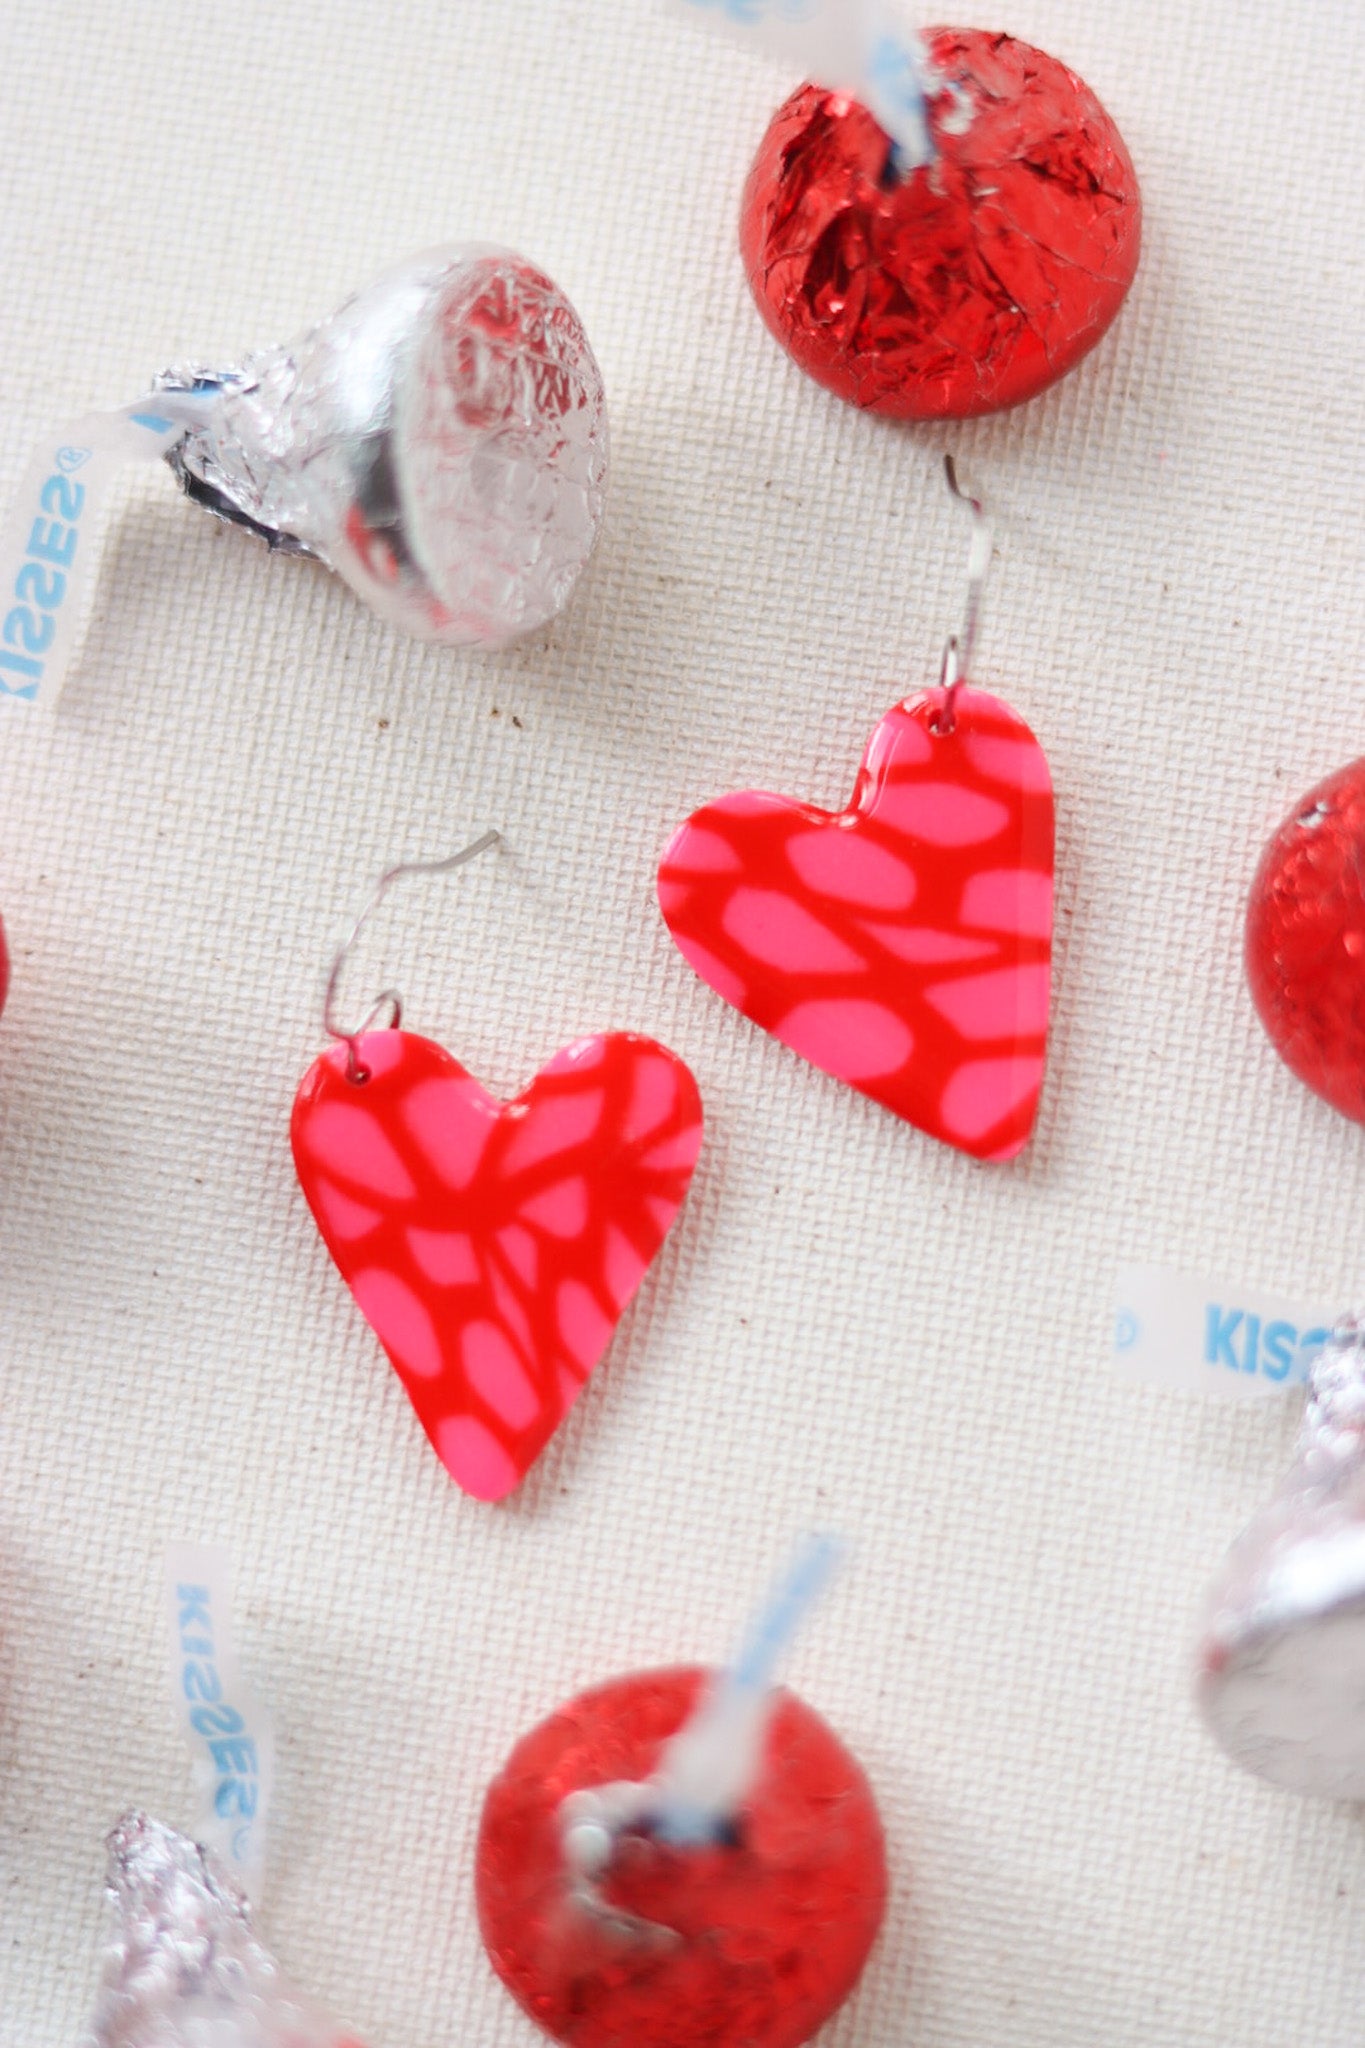 Handcrafted Polymer Clay Earrings- Valentine's Day Floral – Ivy Lena